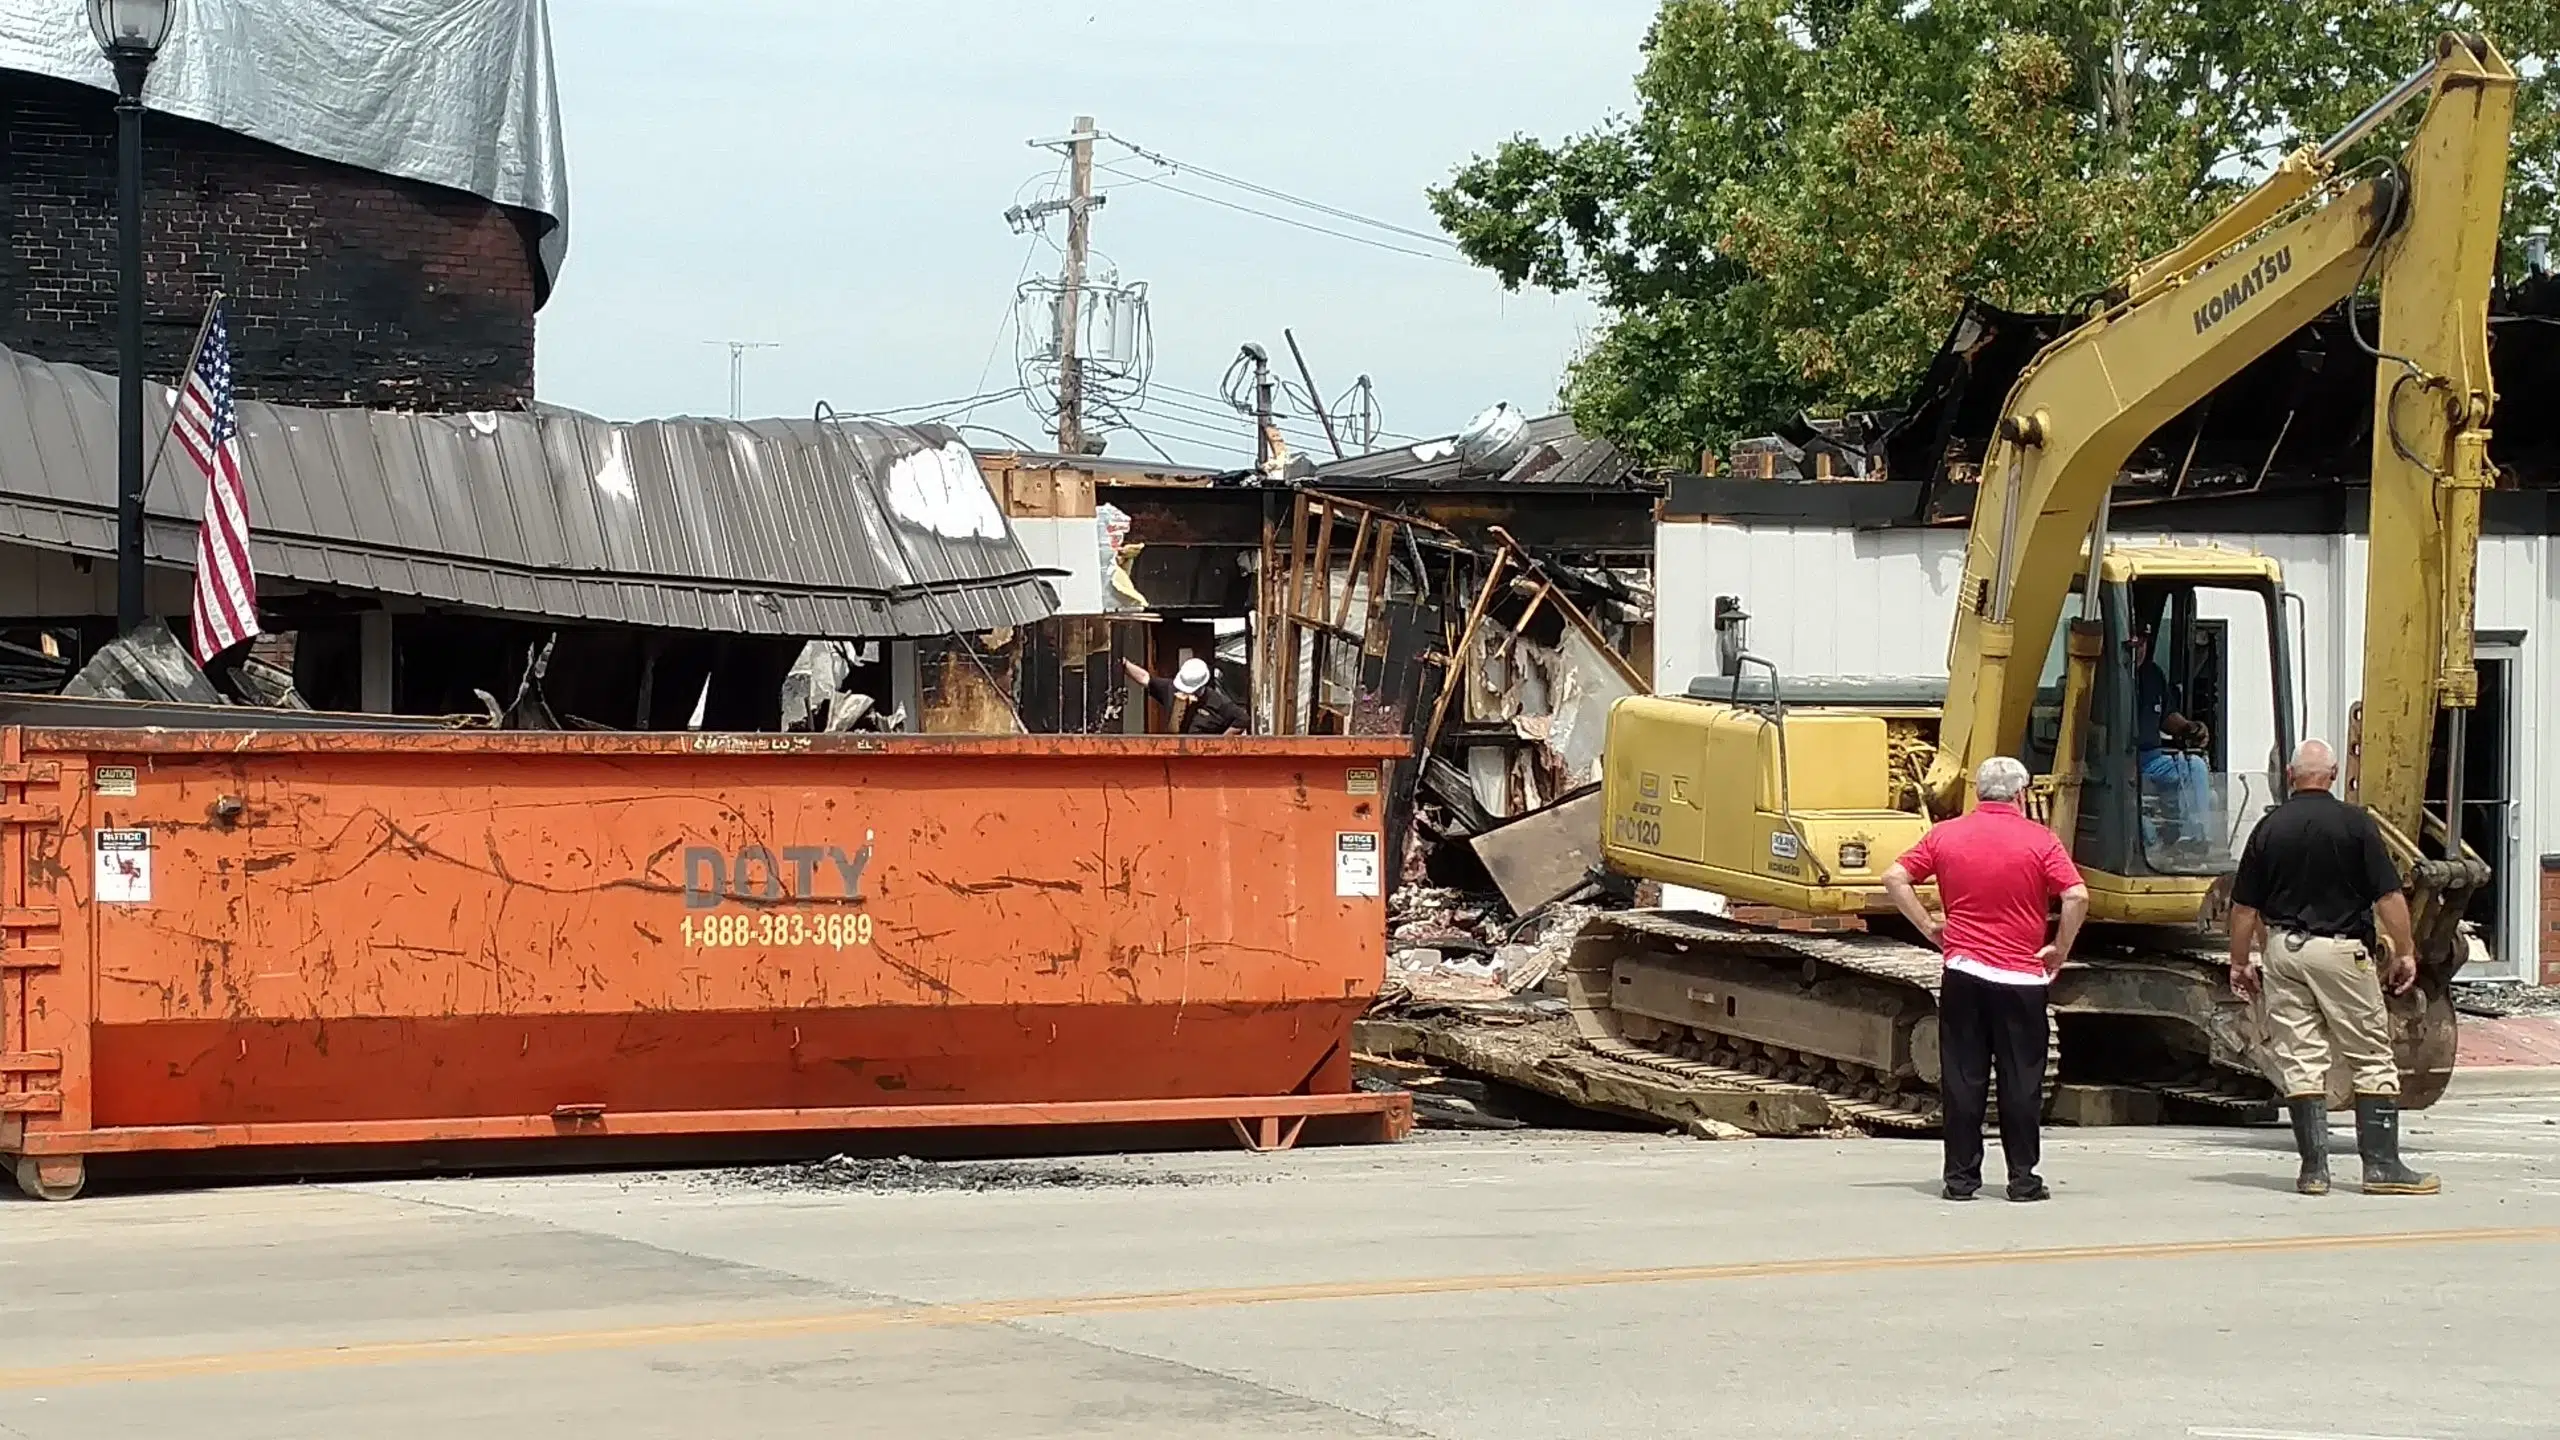 Vandalia Mayor Gottman talks about downtown fire---some clean up underway today